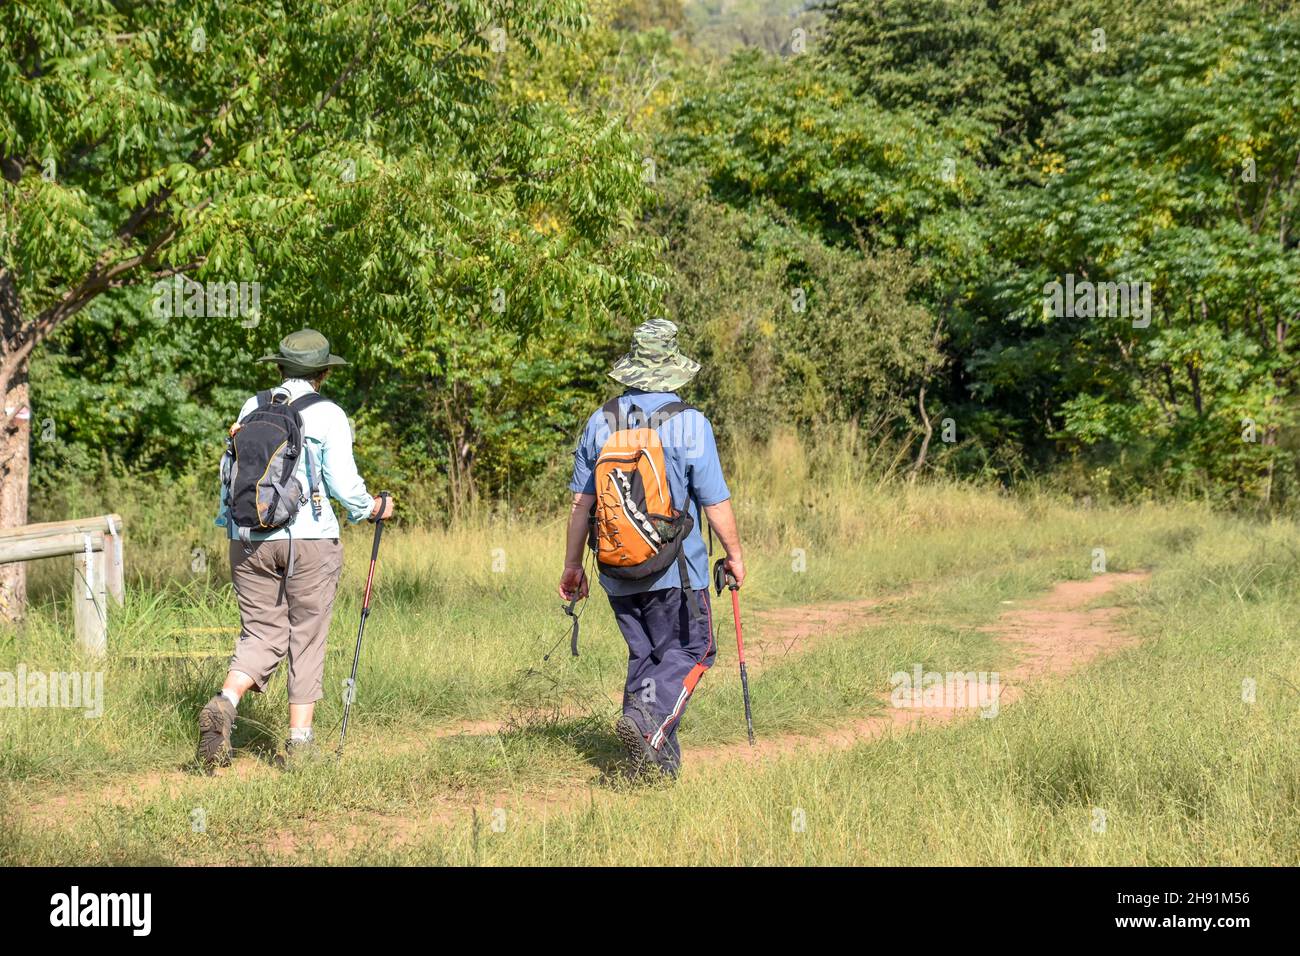 Hikers on a dirt road in the Trichardspoort River Valley, Gouwsberg Mountain Range in the vicinity of Bronkhorstspruit east of Pretoria South Africa Stock Photo